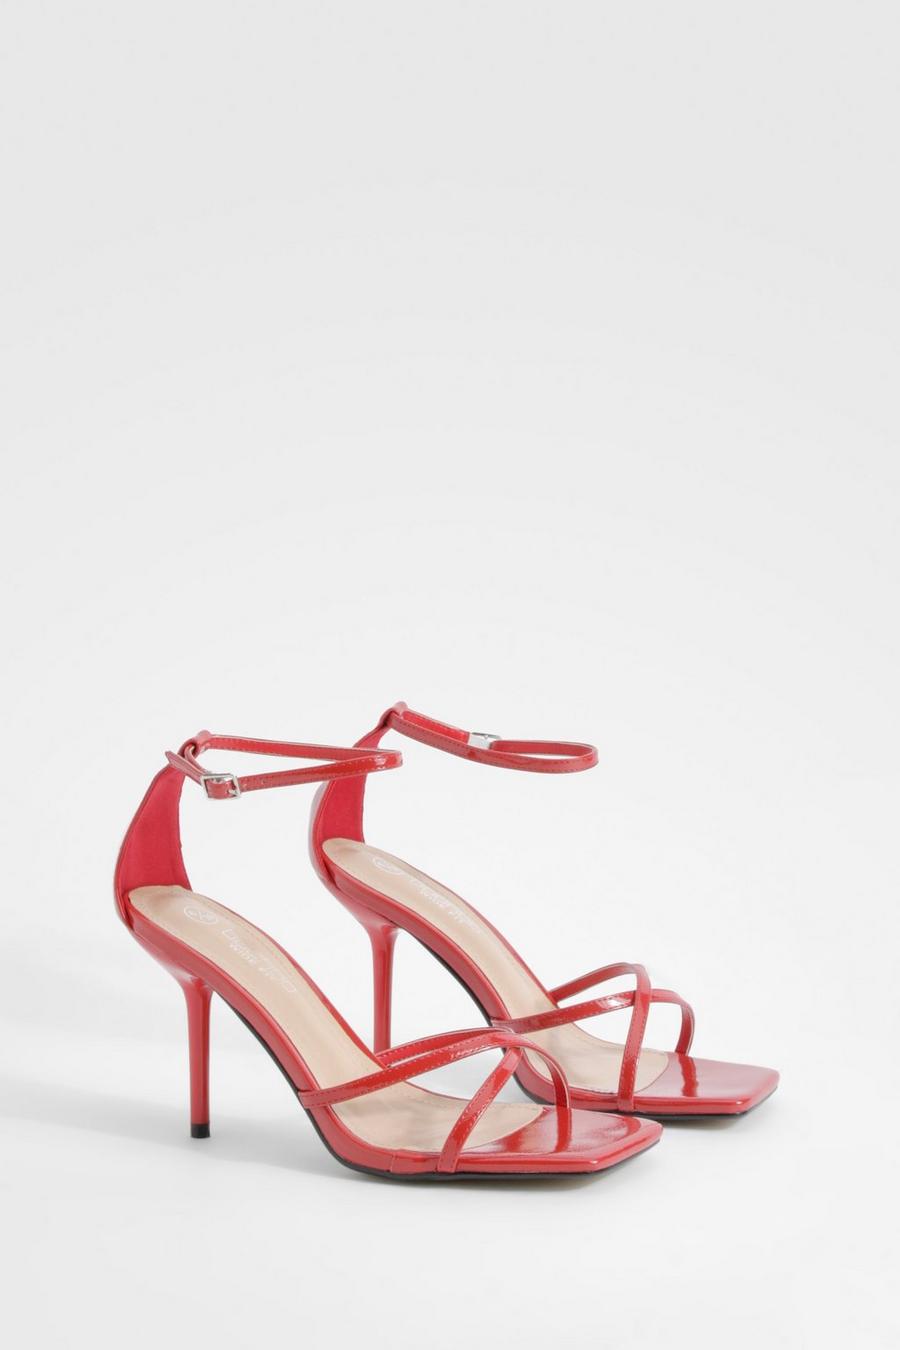 Red Wide Width Stiletto Crossover Barely There Heels